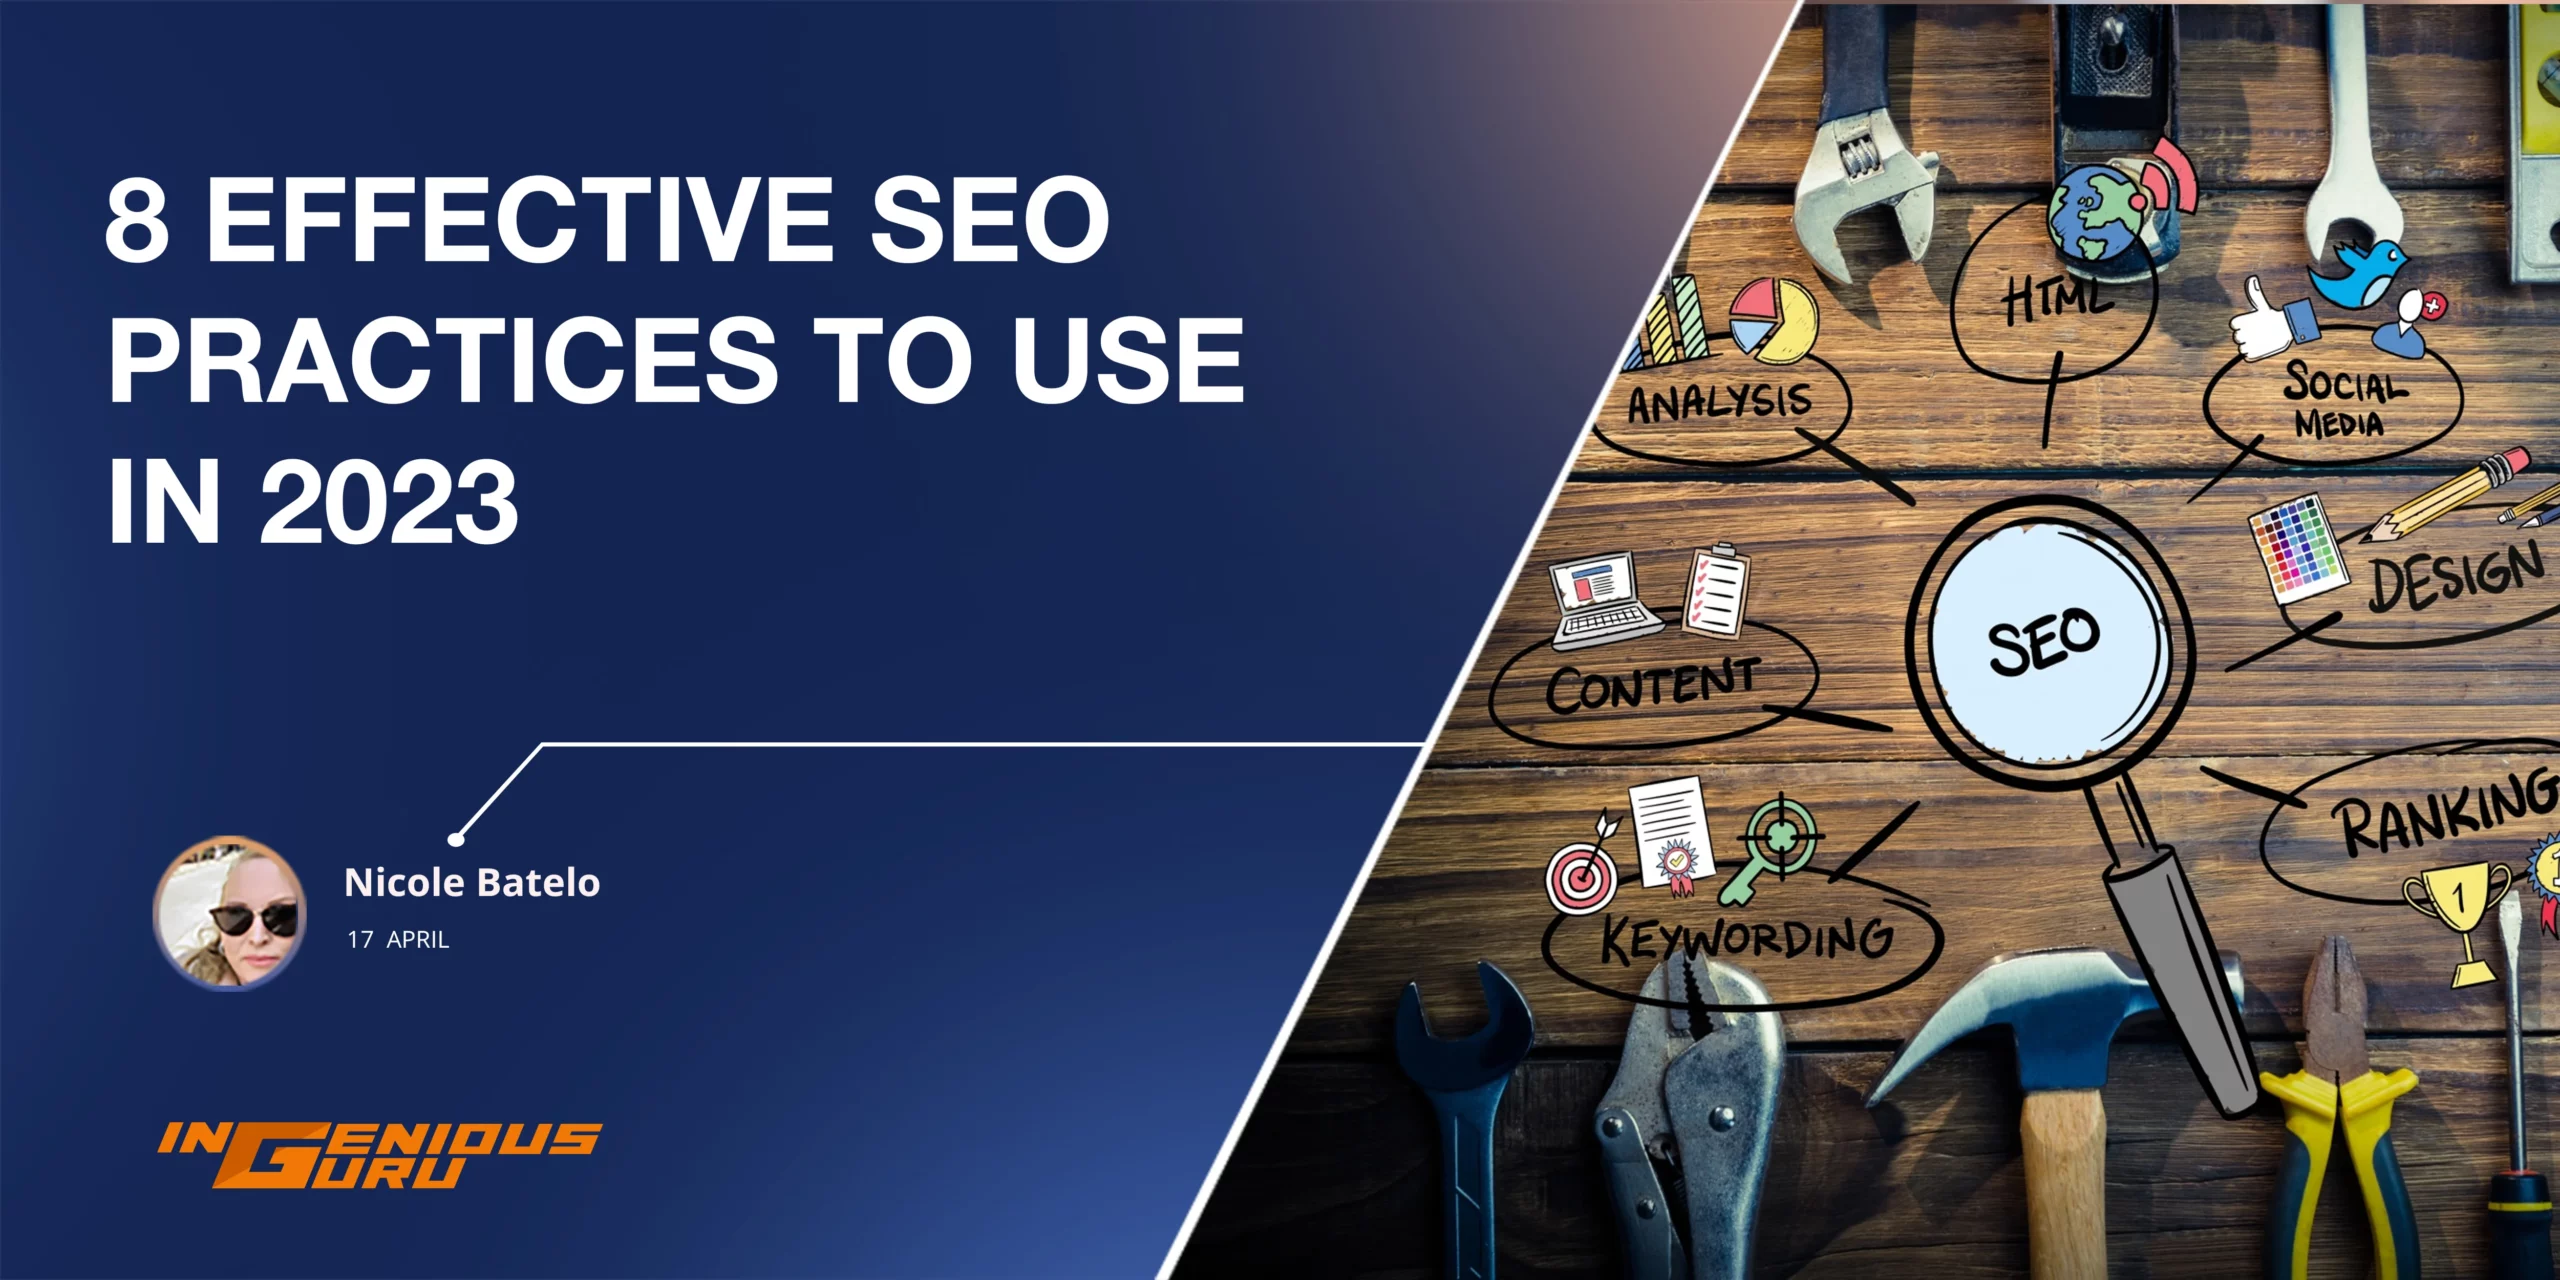 Effective SEO Practices to Use in 2023